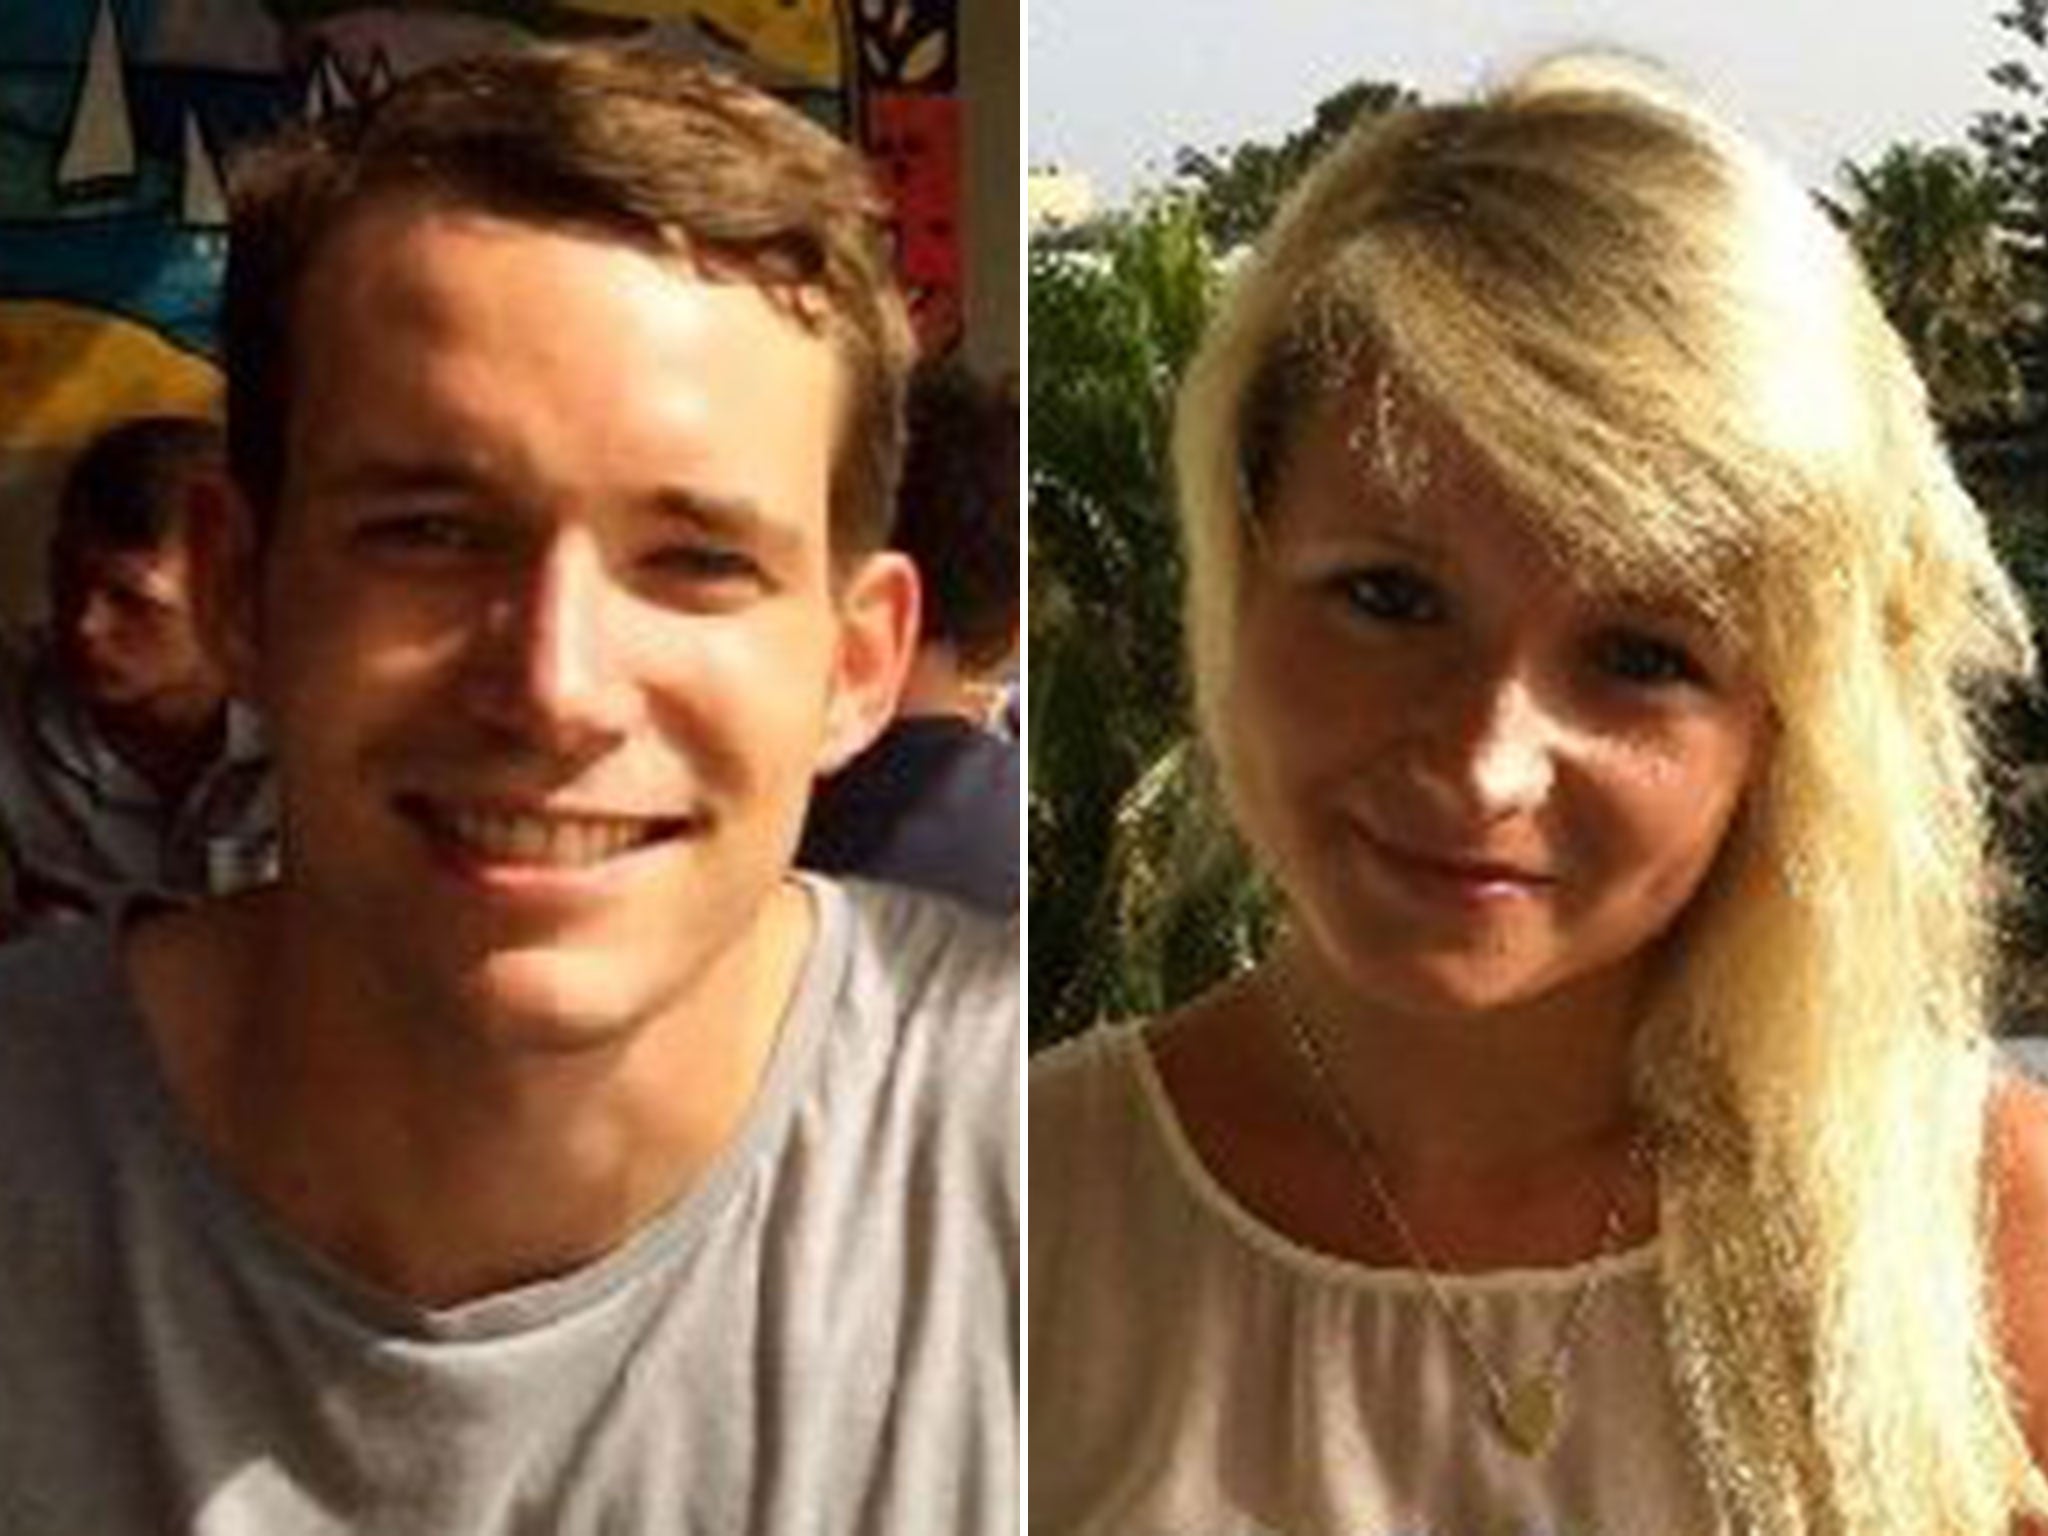 David Miller, 24, and Hannah Witheridge, 23 were killed on the small island of Koh Tao on 15 September